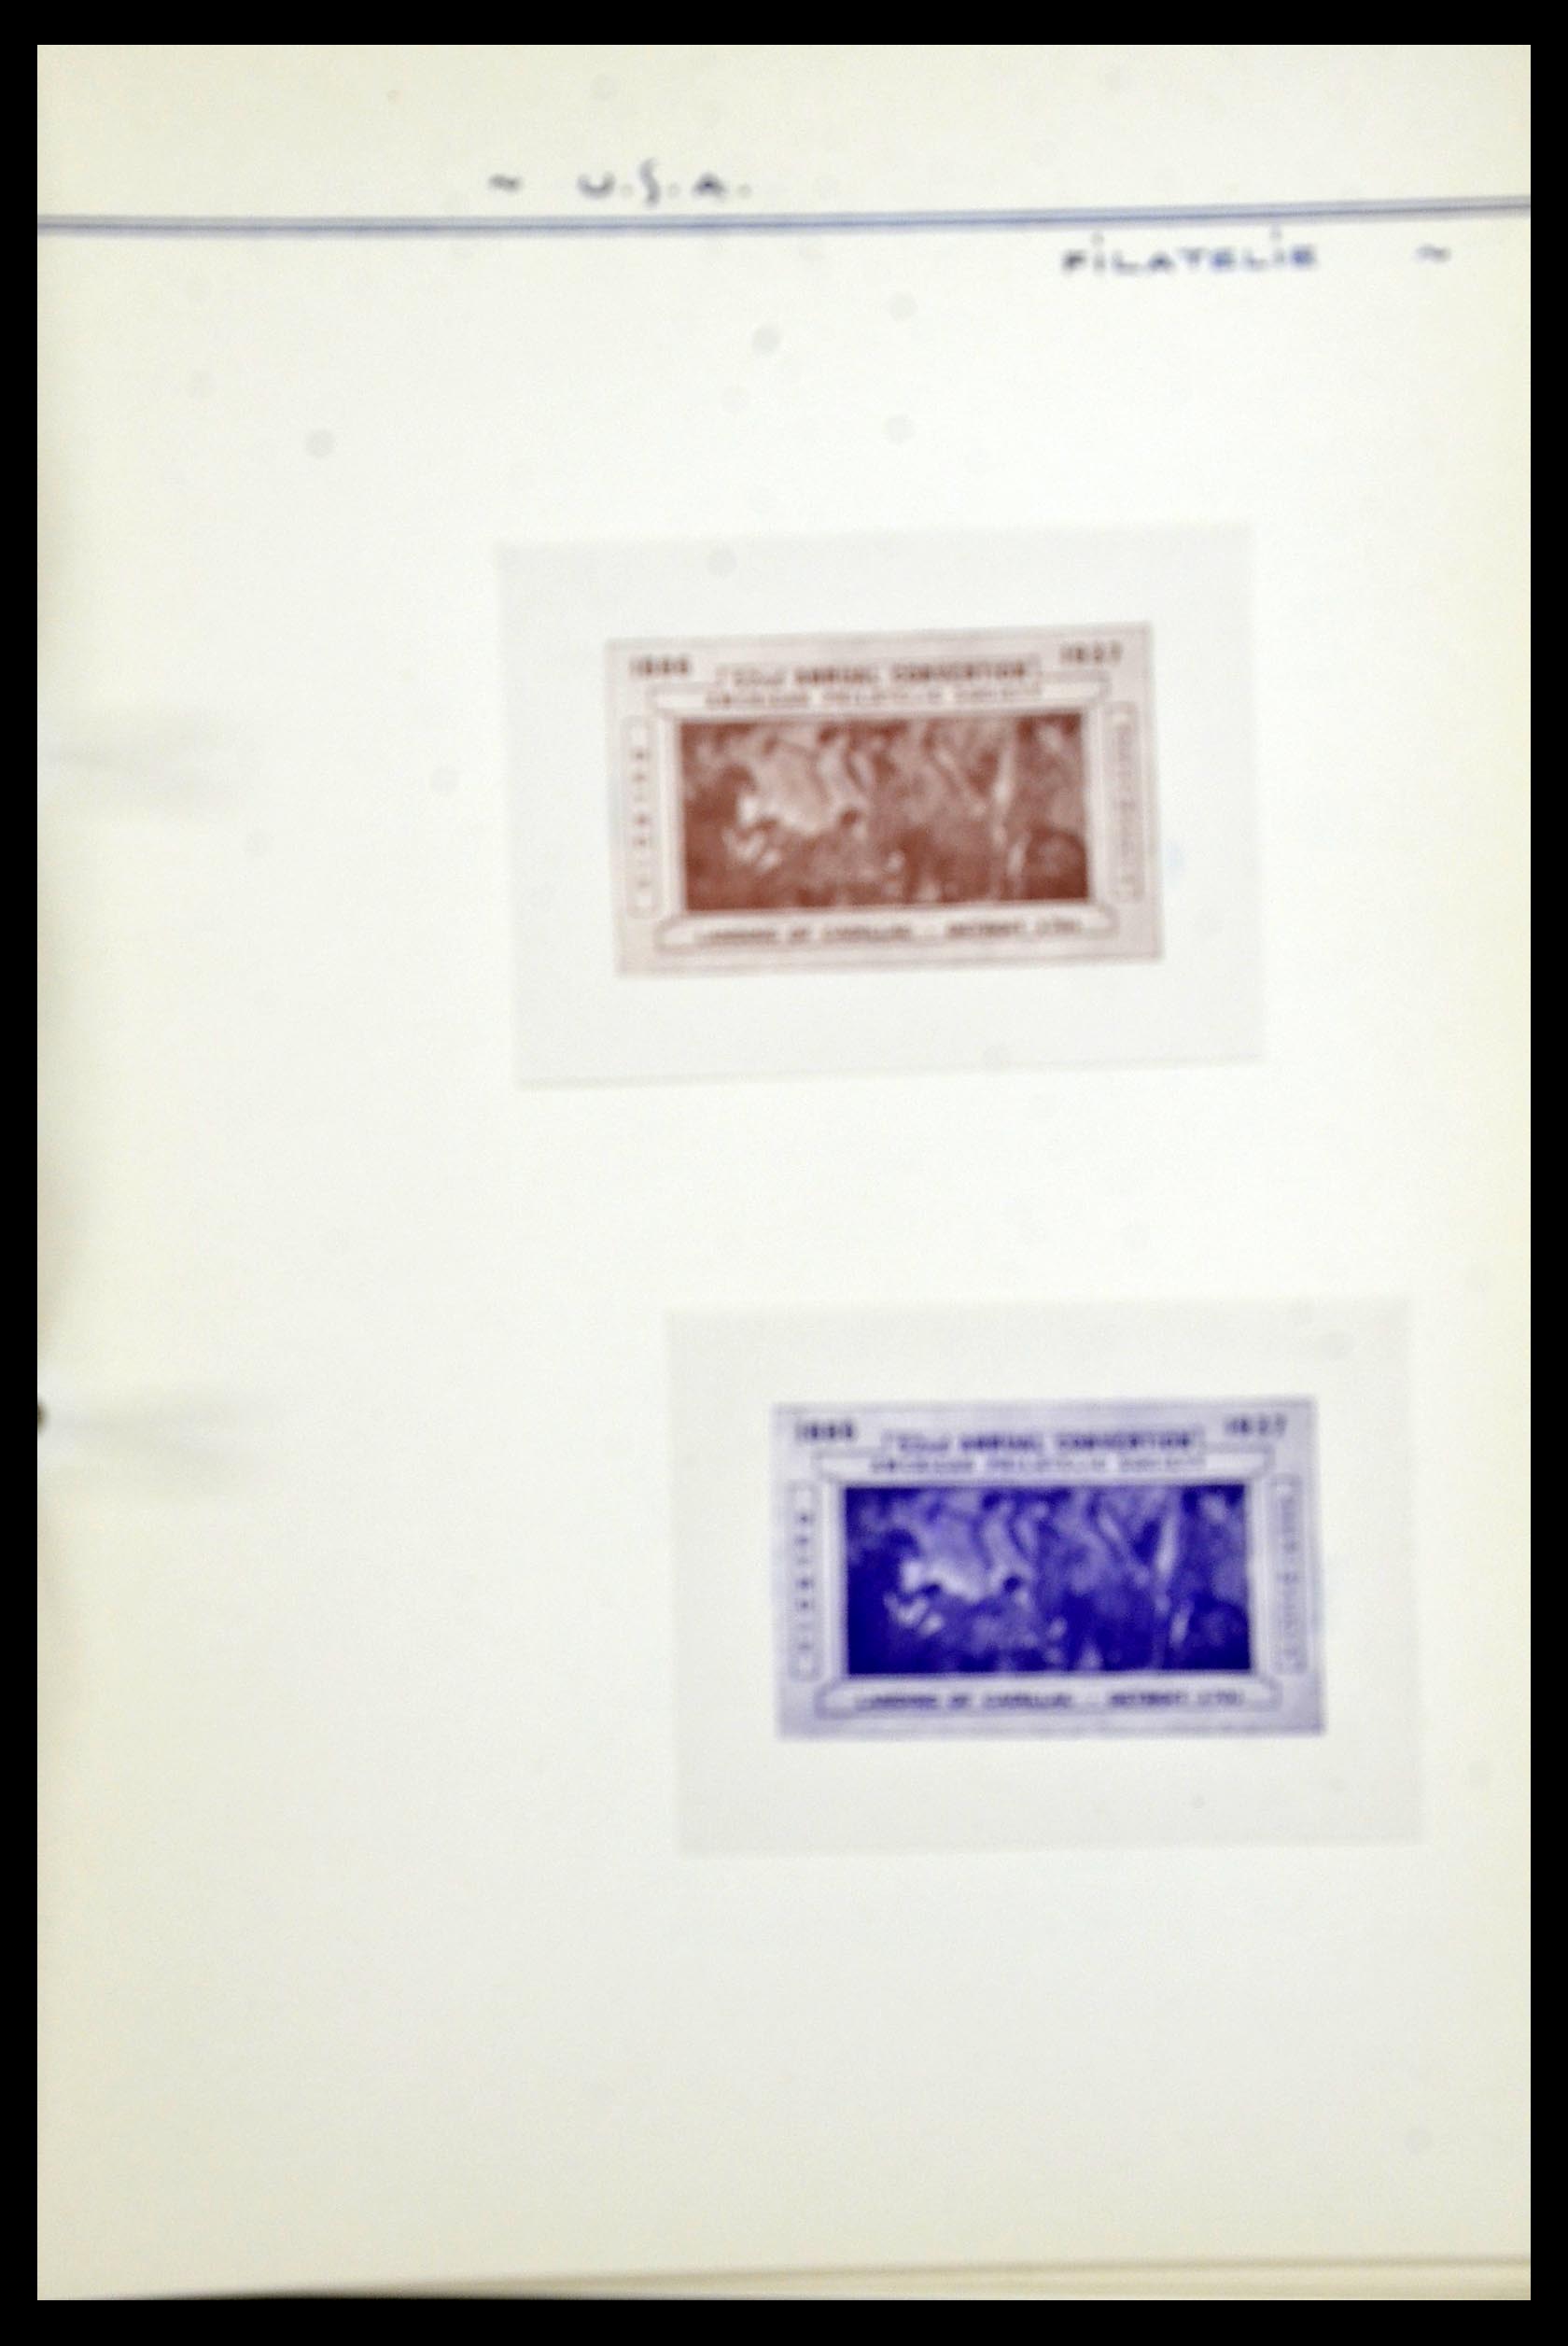 34486 068 - Stamp Collection 34486 USA philatelic labels 1926-1960.